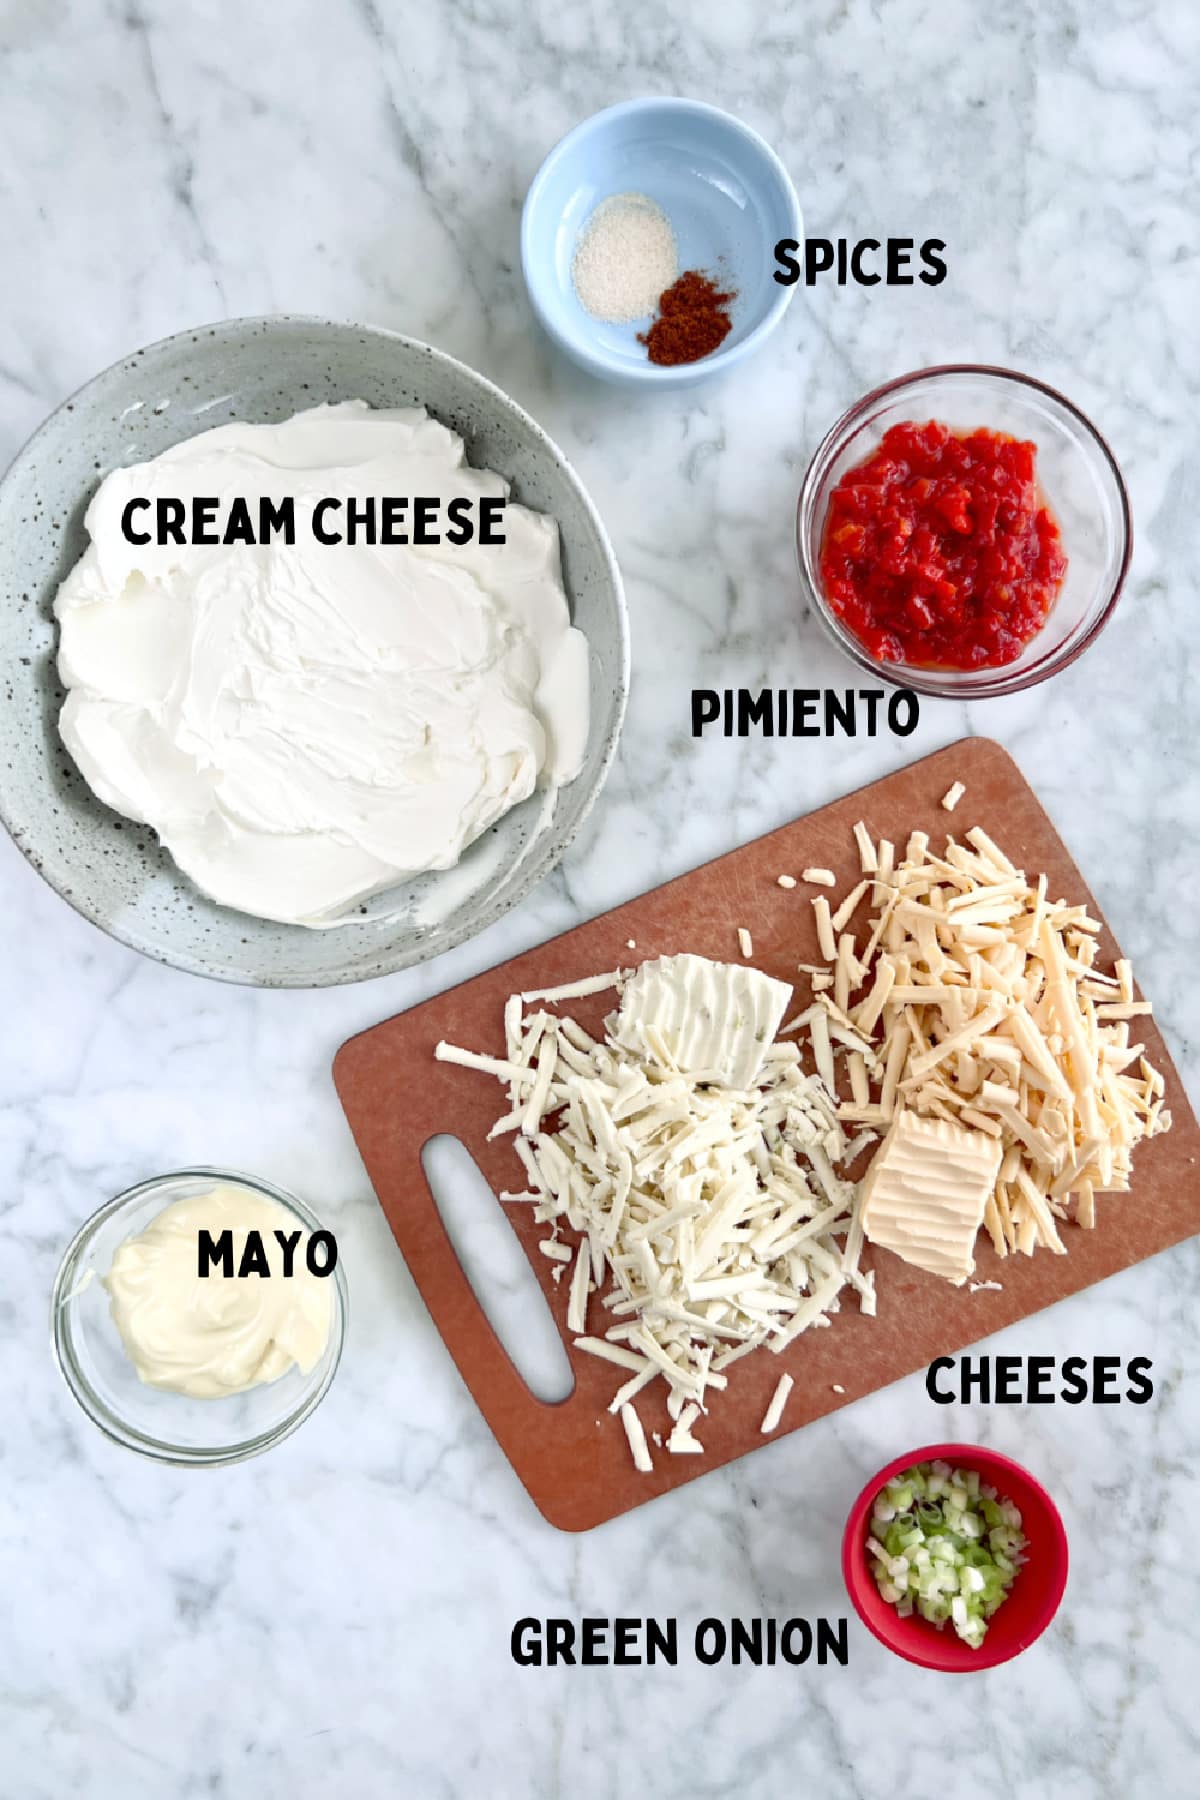 Ingredients to make pimiento cheese: cream cheese, grated cheese, spices, pimiento, mayo, and green onion.